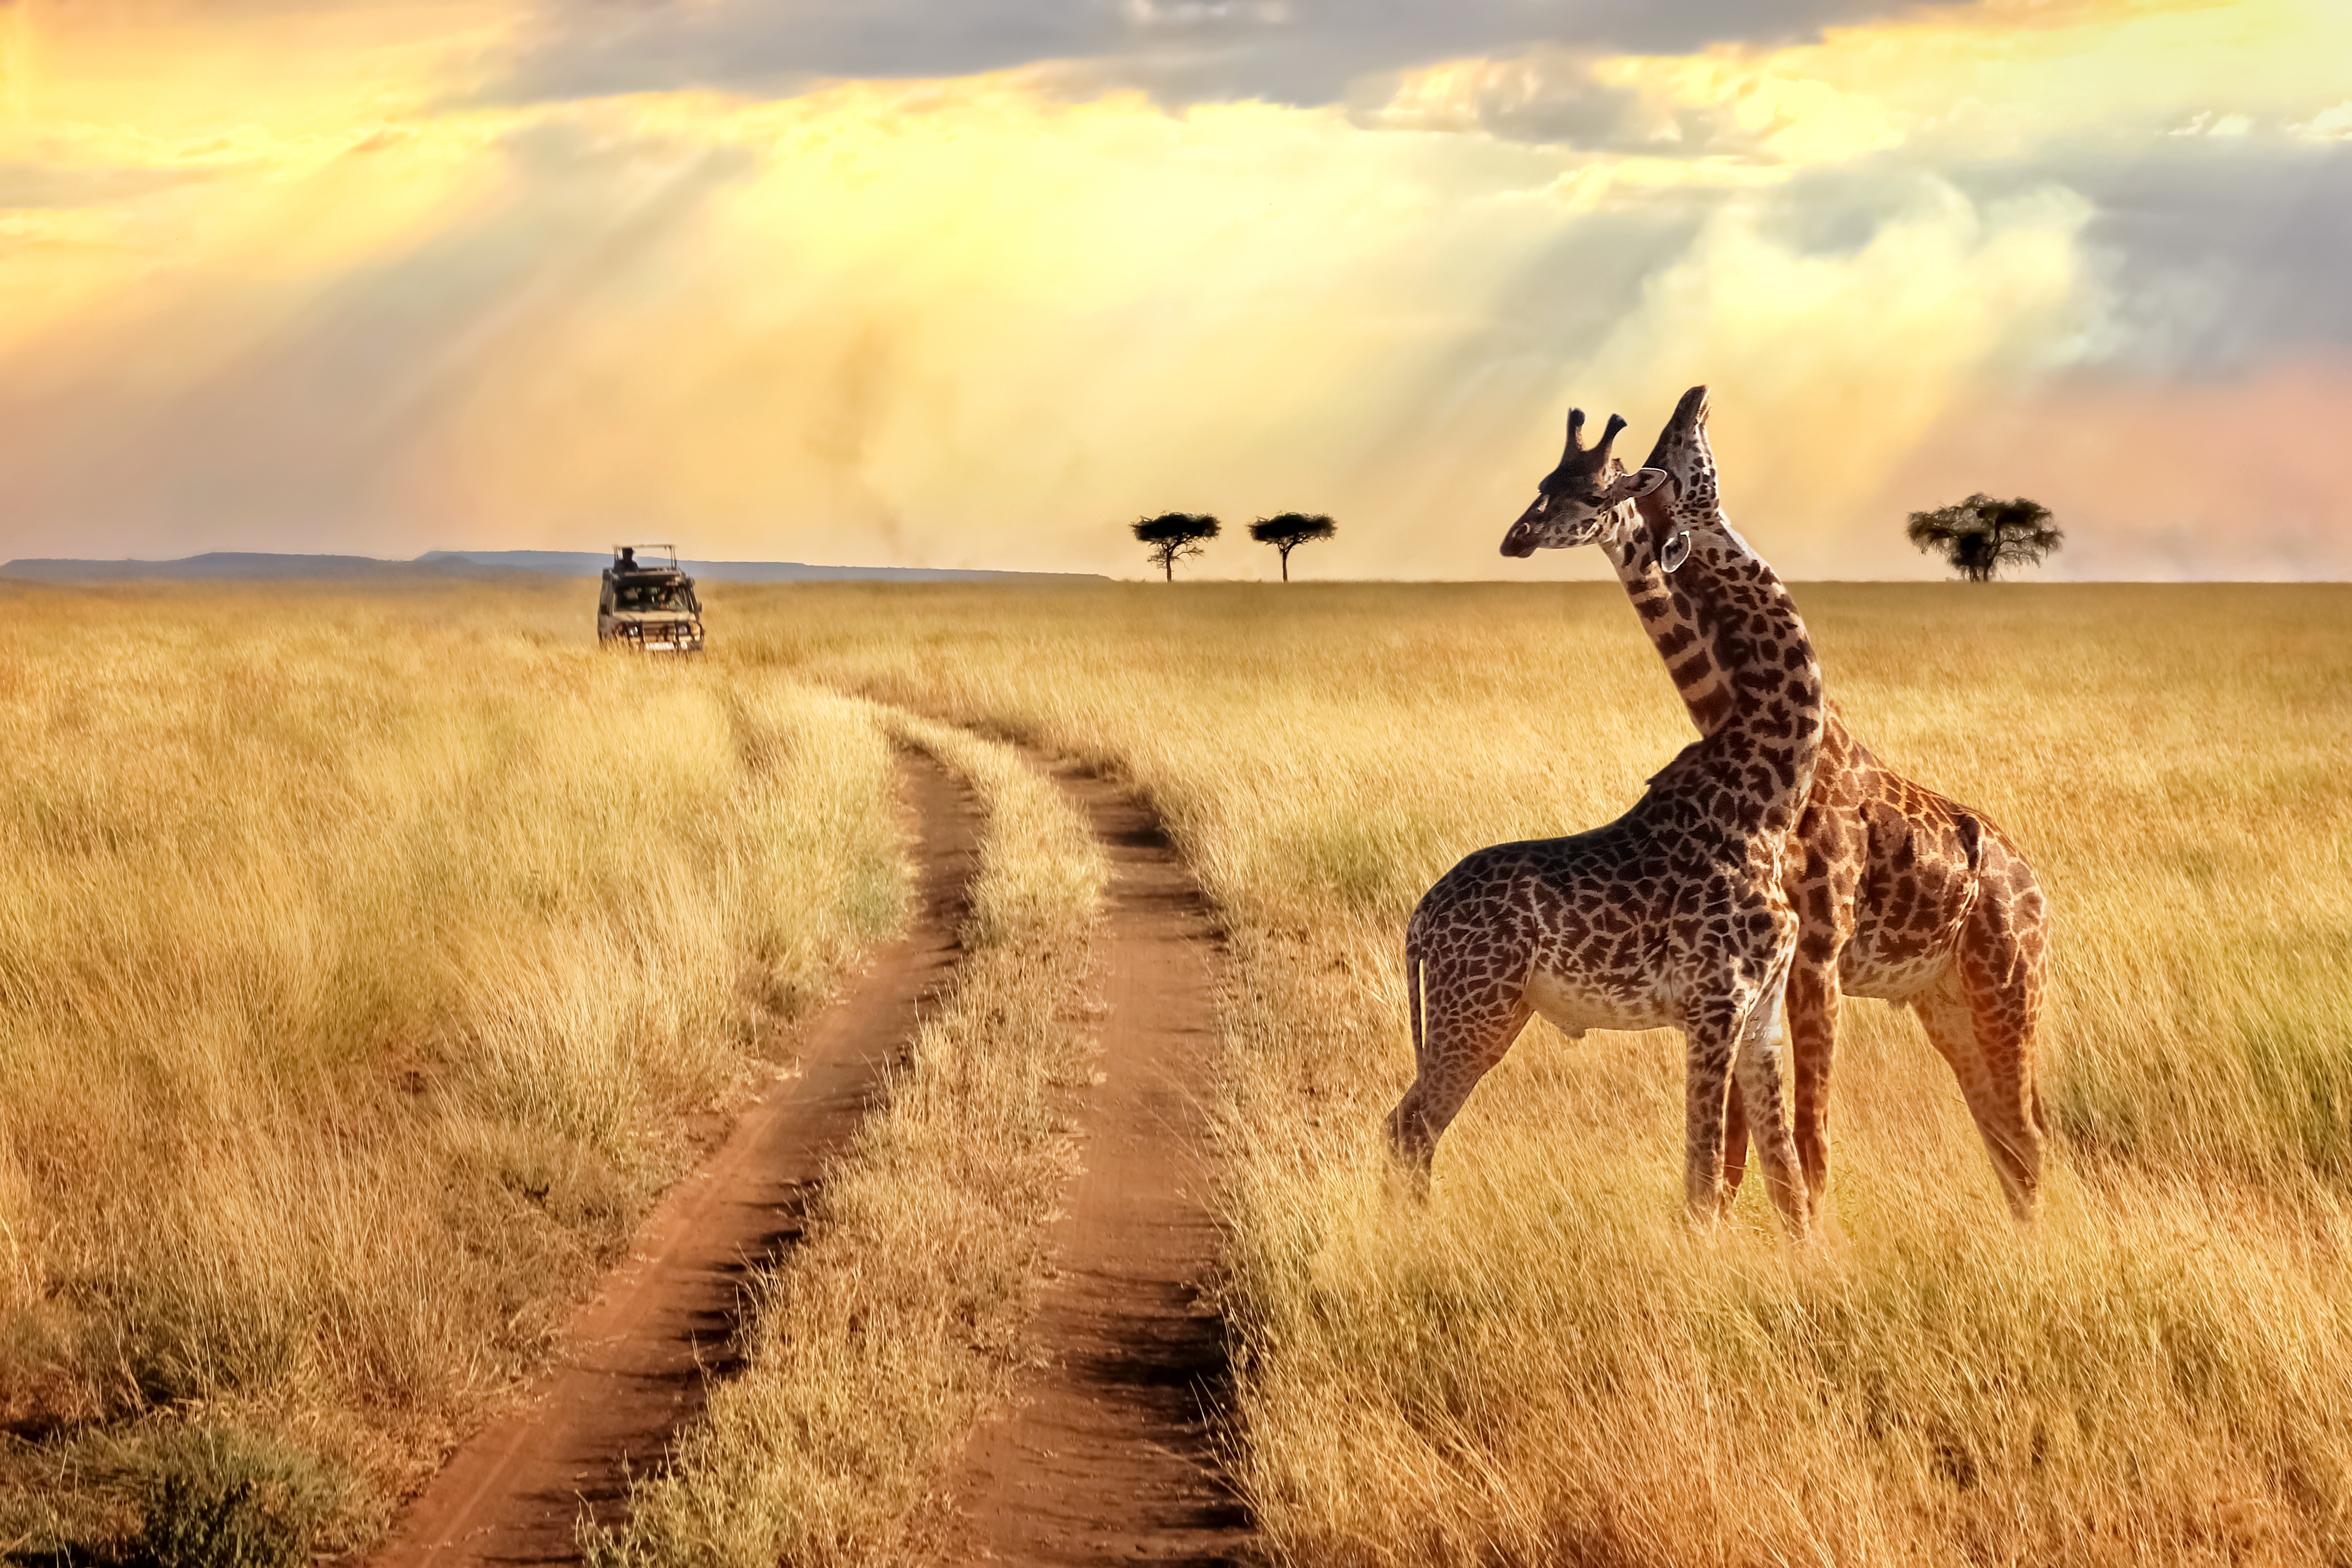 Group of giraffes in the Serengeti National Park on a sunset background with rays of sunlight. African safari.